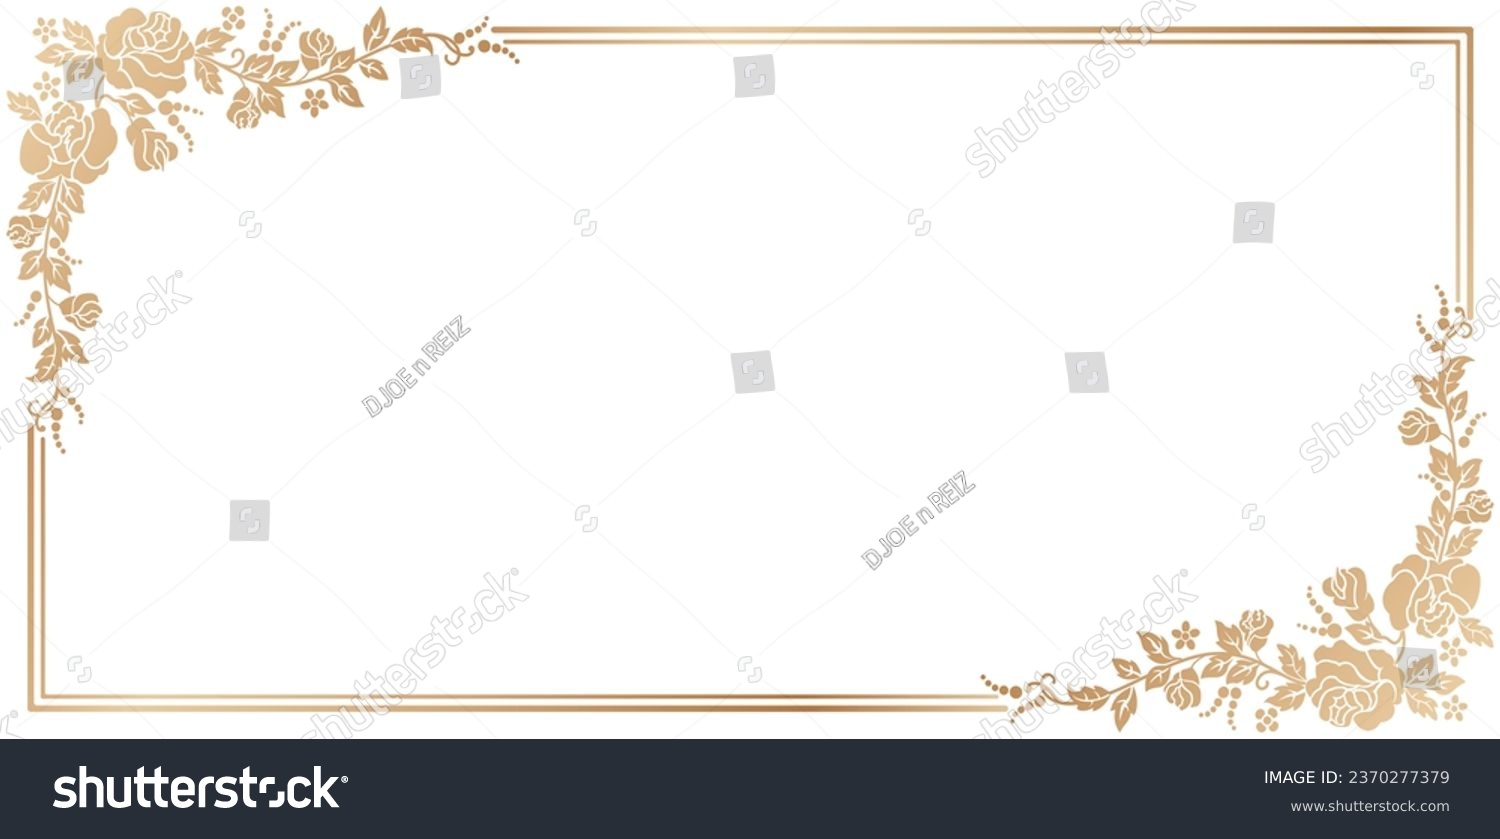 vector illustration of rose flower corner frames with golden colors isolated white backgrounds for certificate of completion template, Presentations, User interface ads, Layouts, collages, scene desks #2370277379